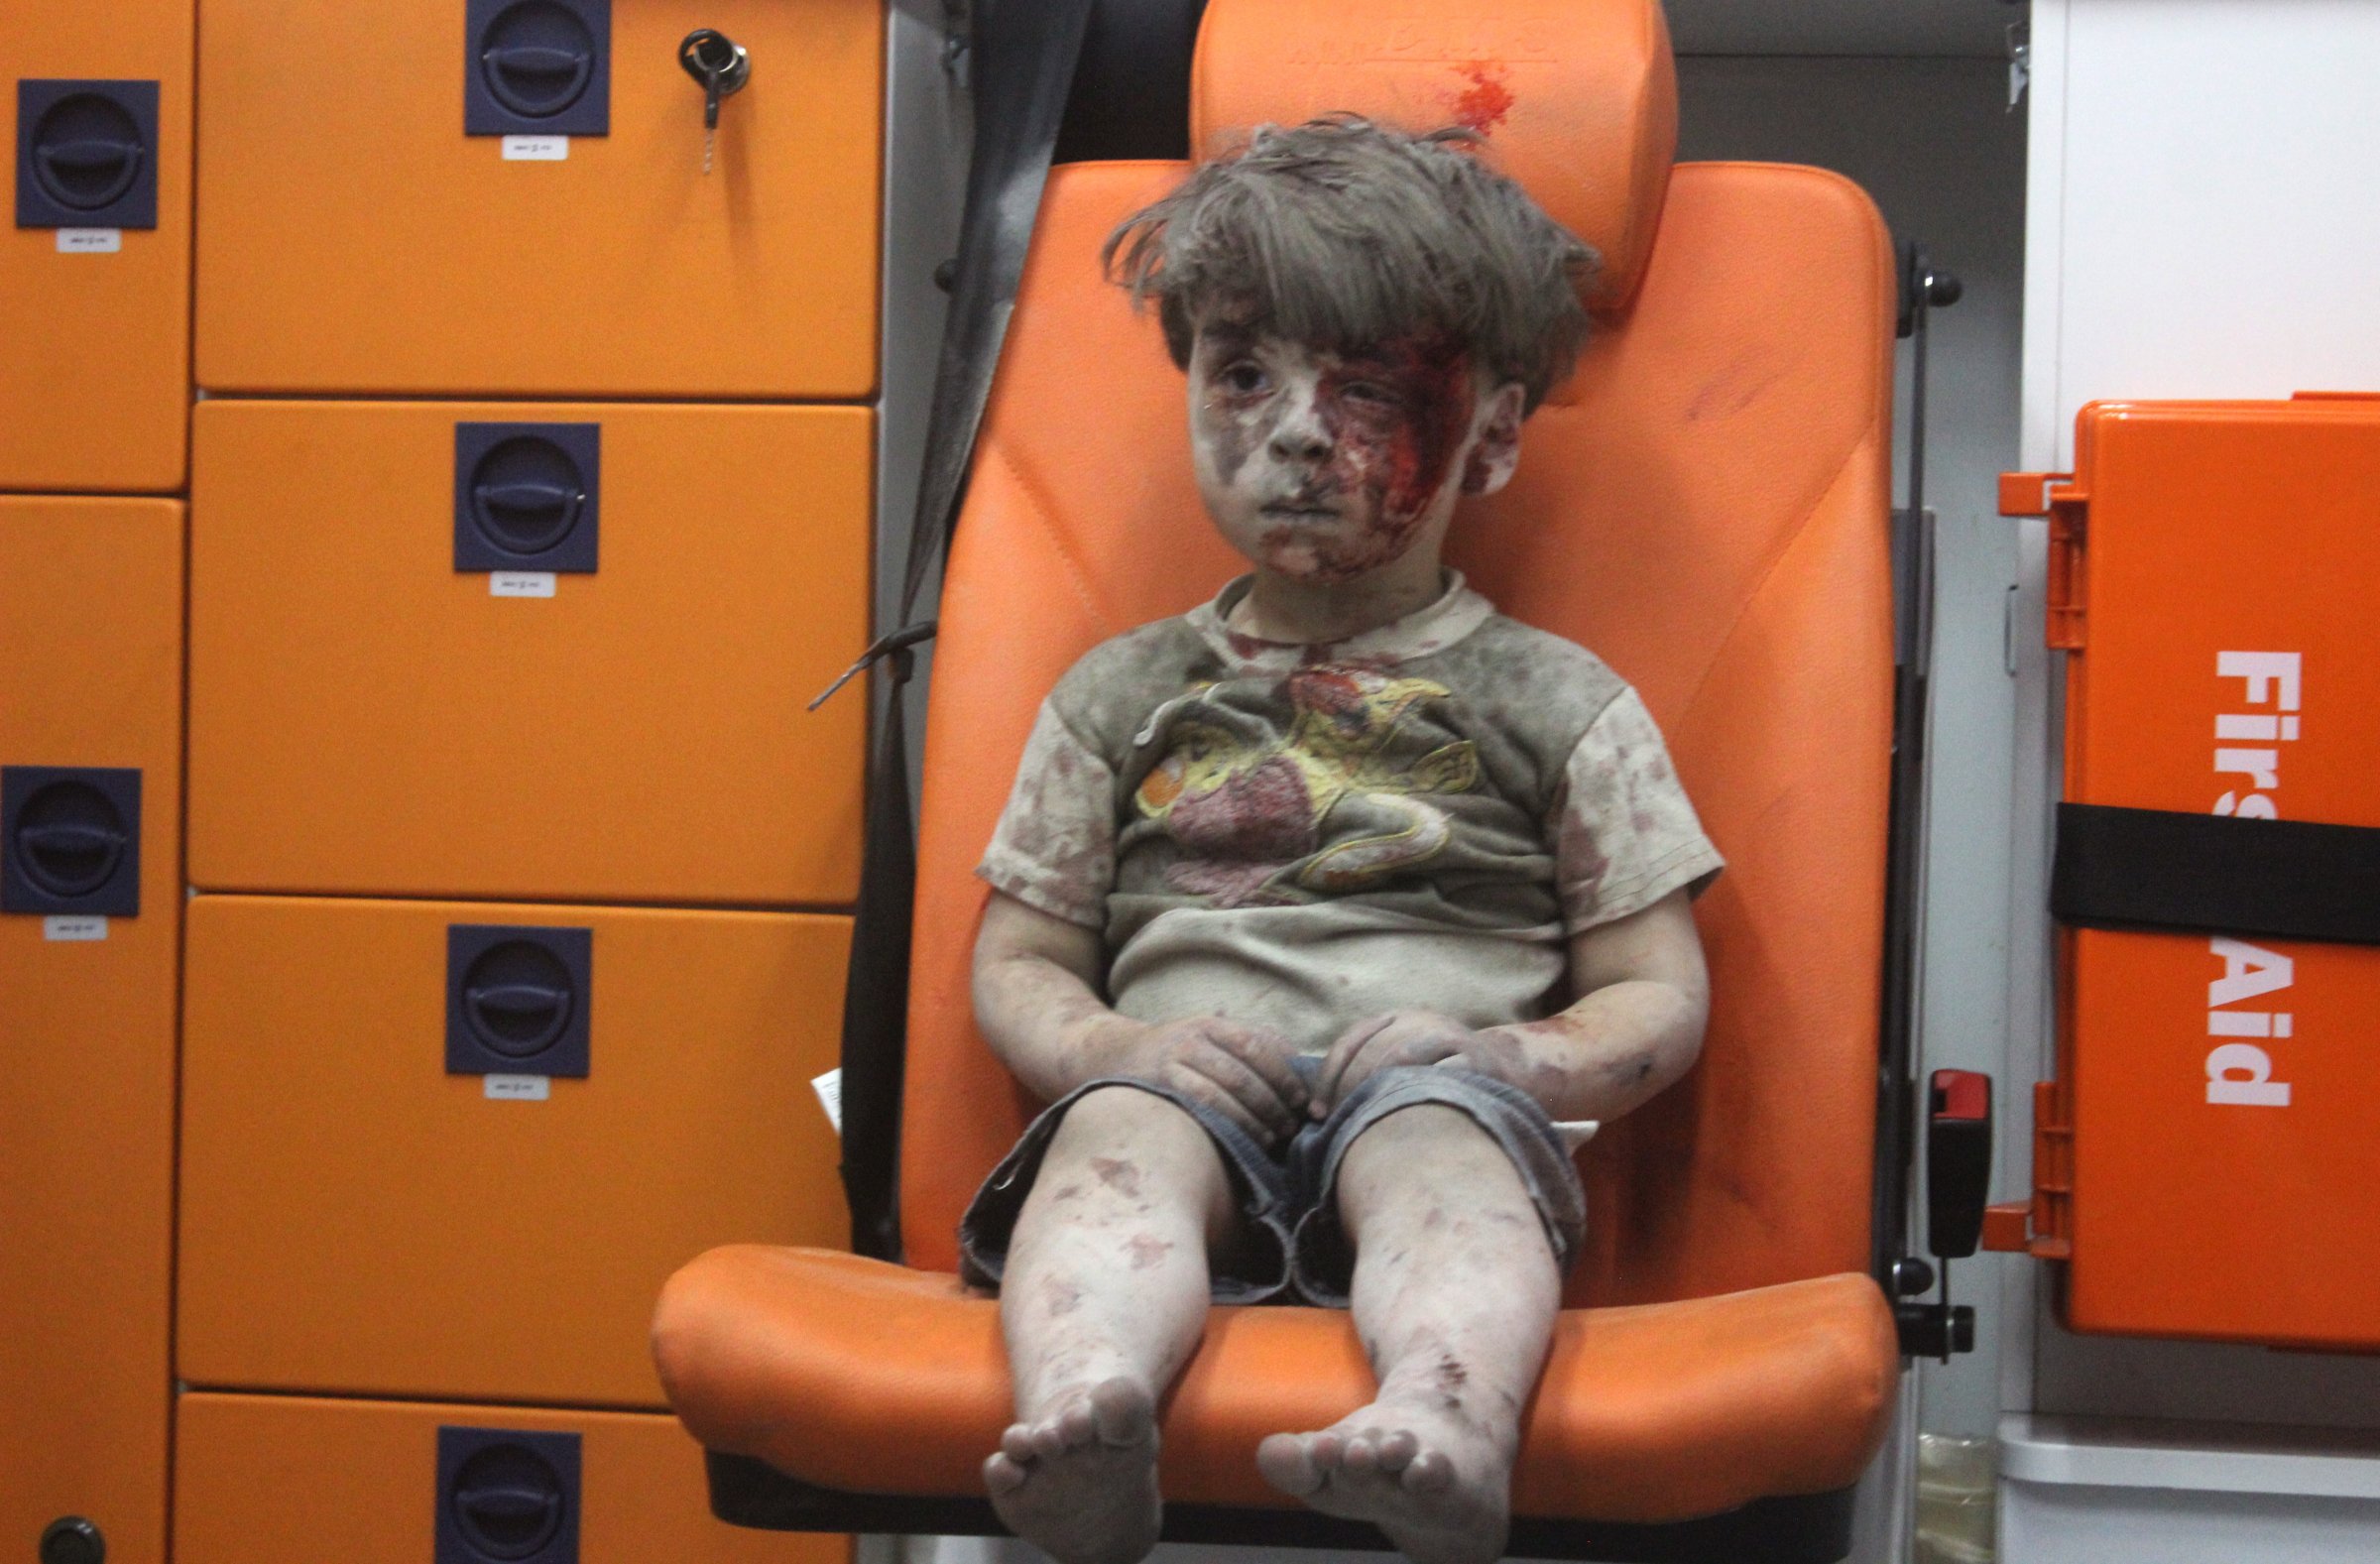 5-year-old wounded Syrian kid Omran Daqneesh sits alone in the back of the ambulance after he got injured during Russian or Assad regime forces air strike targeting the Qaterji neighbourhood of Aleppo on August 17, 2016.